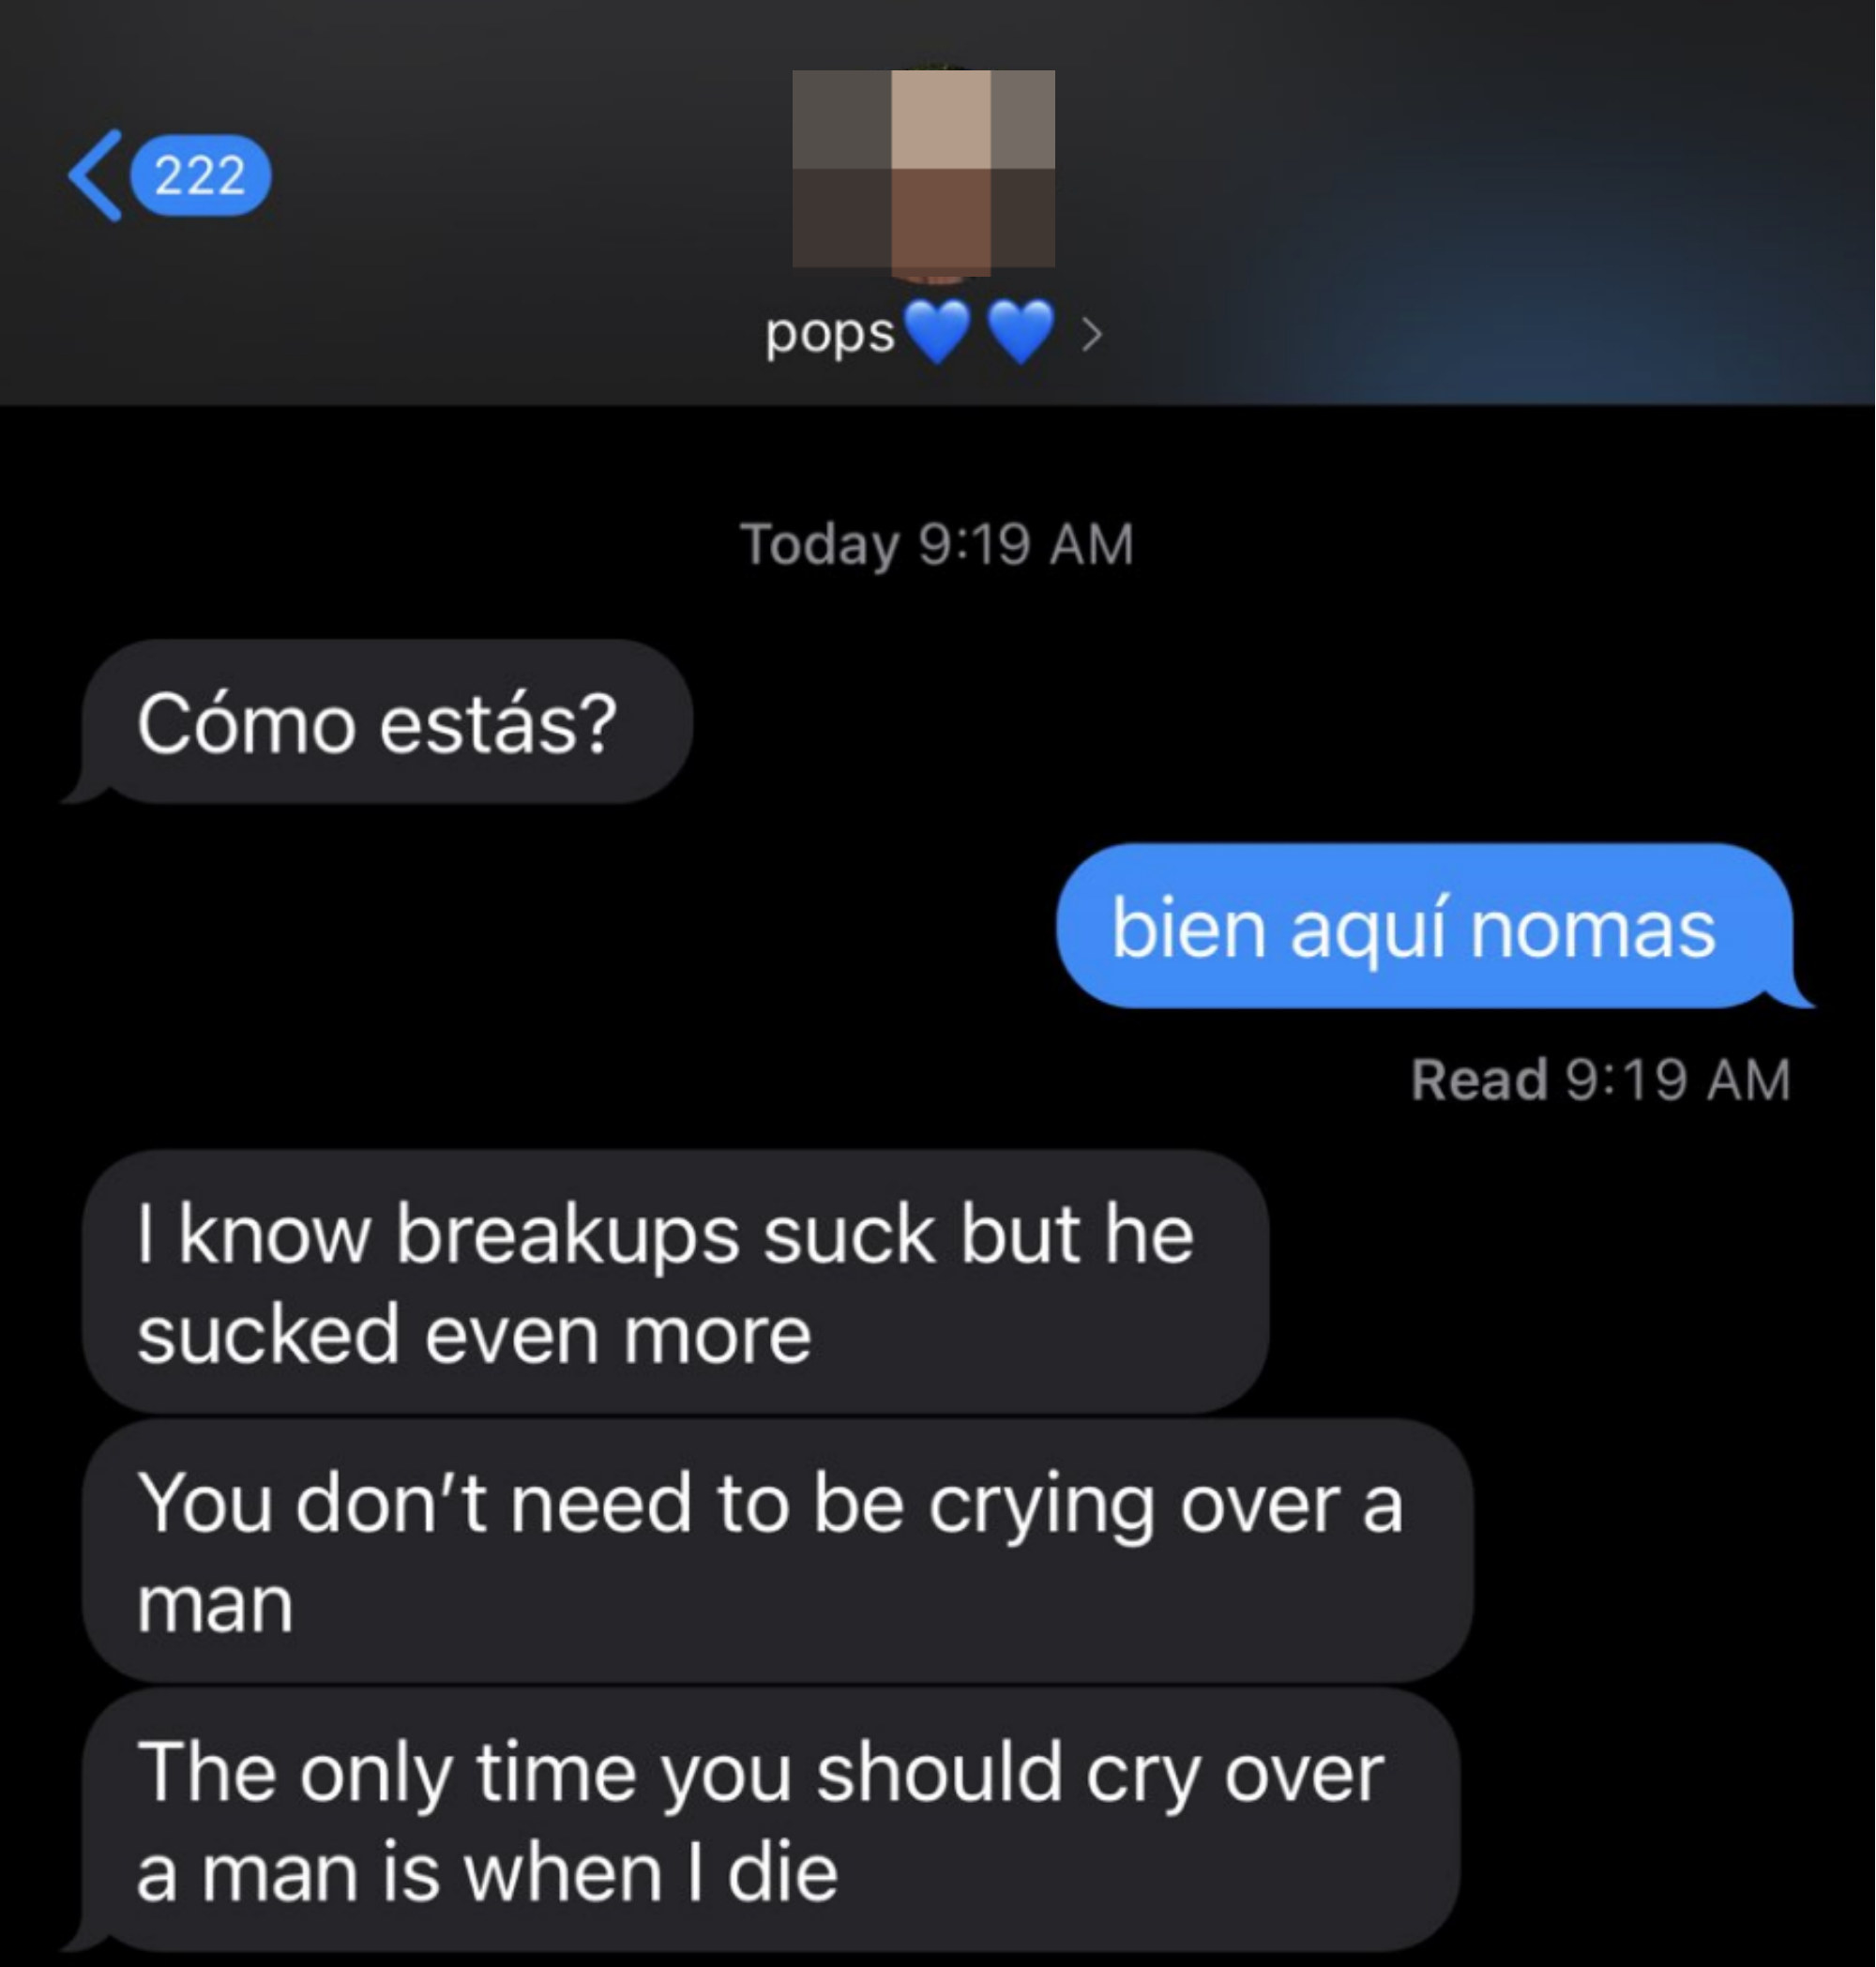 dad checking in on daughter after her breakup and says, the only time you need to cry over a man is when i die